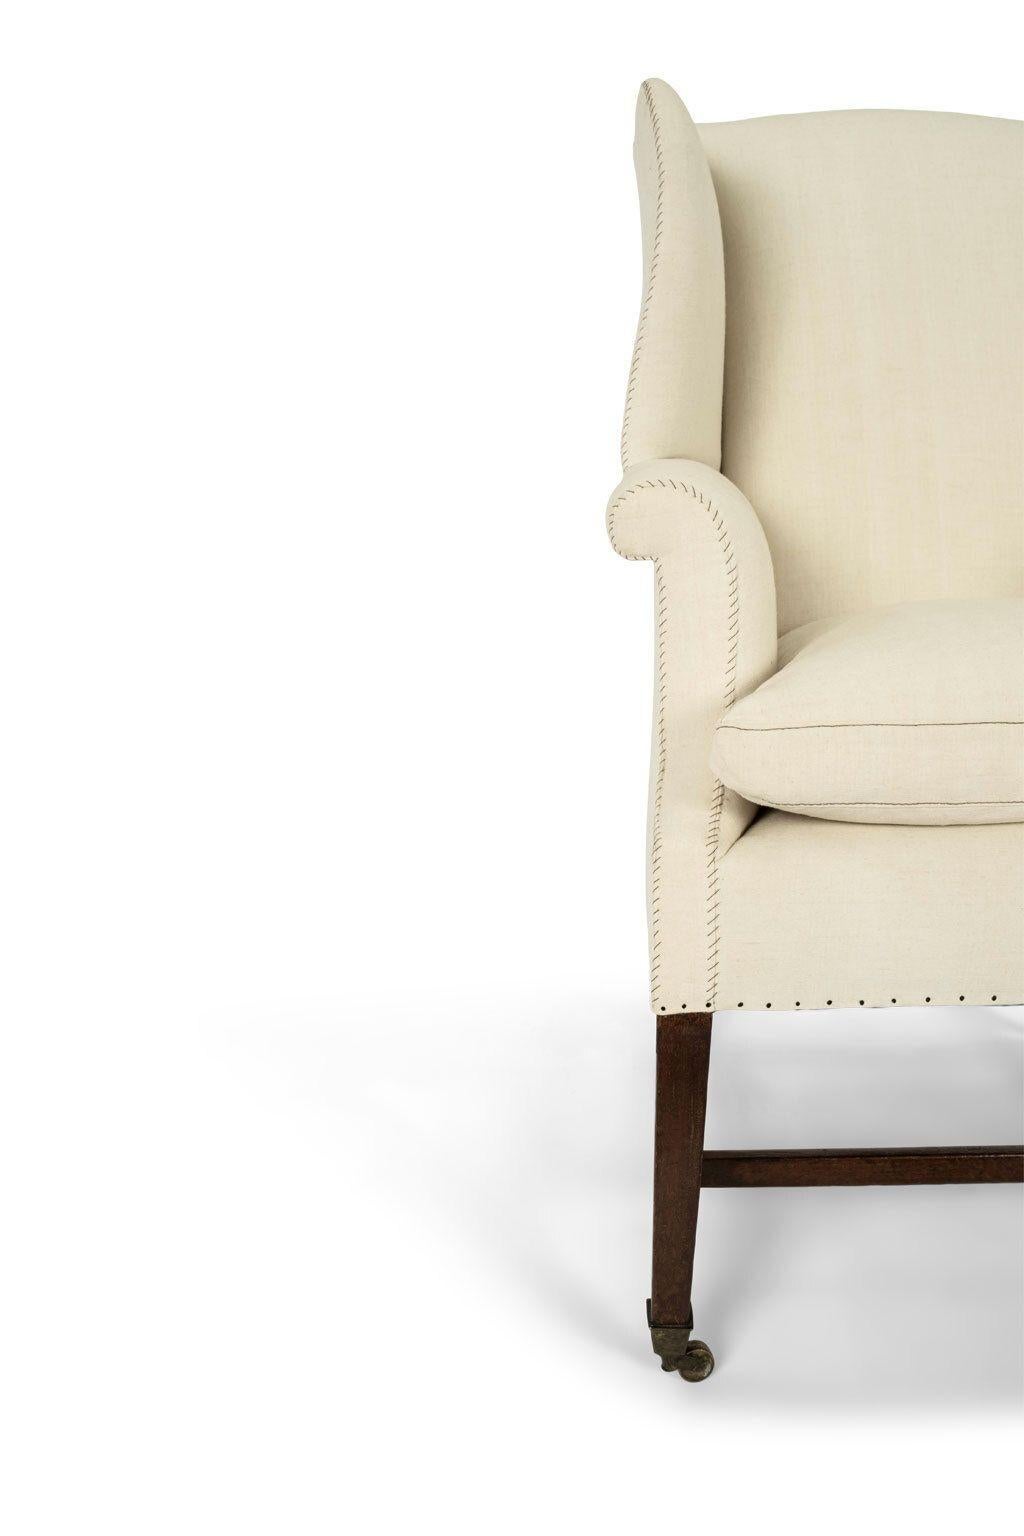 George III 19th Century Wingback Upholstered in Antique Off-White Linen